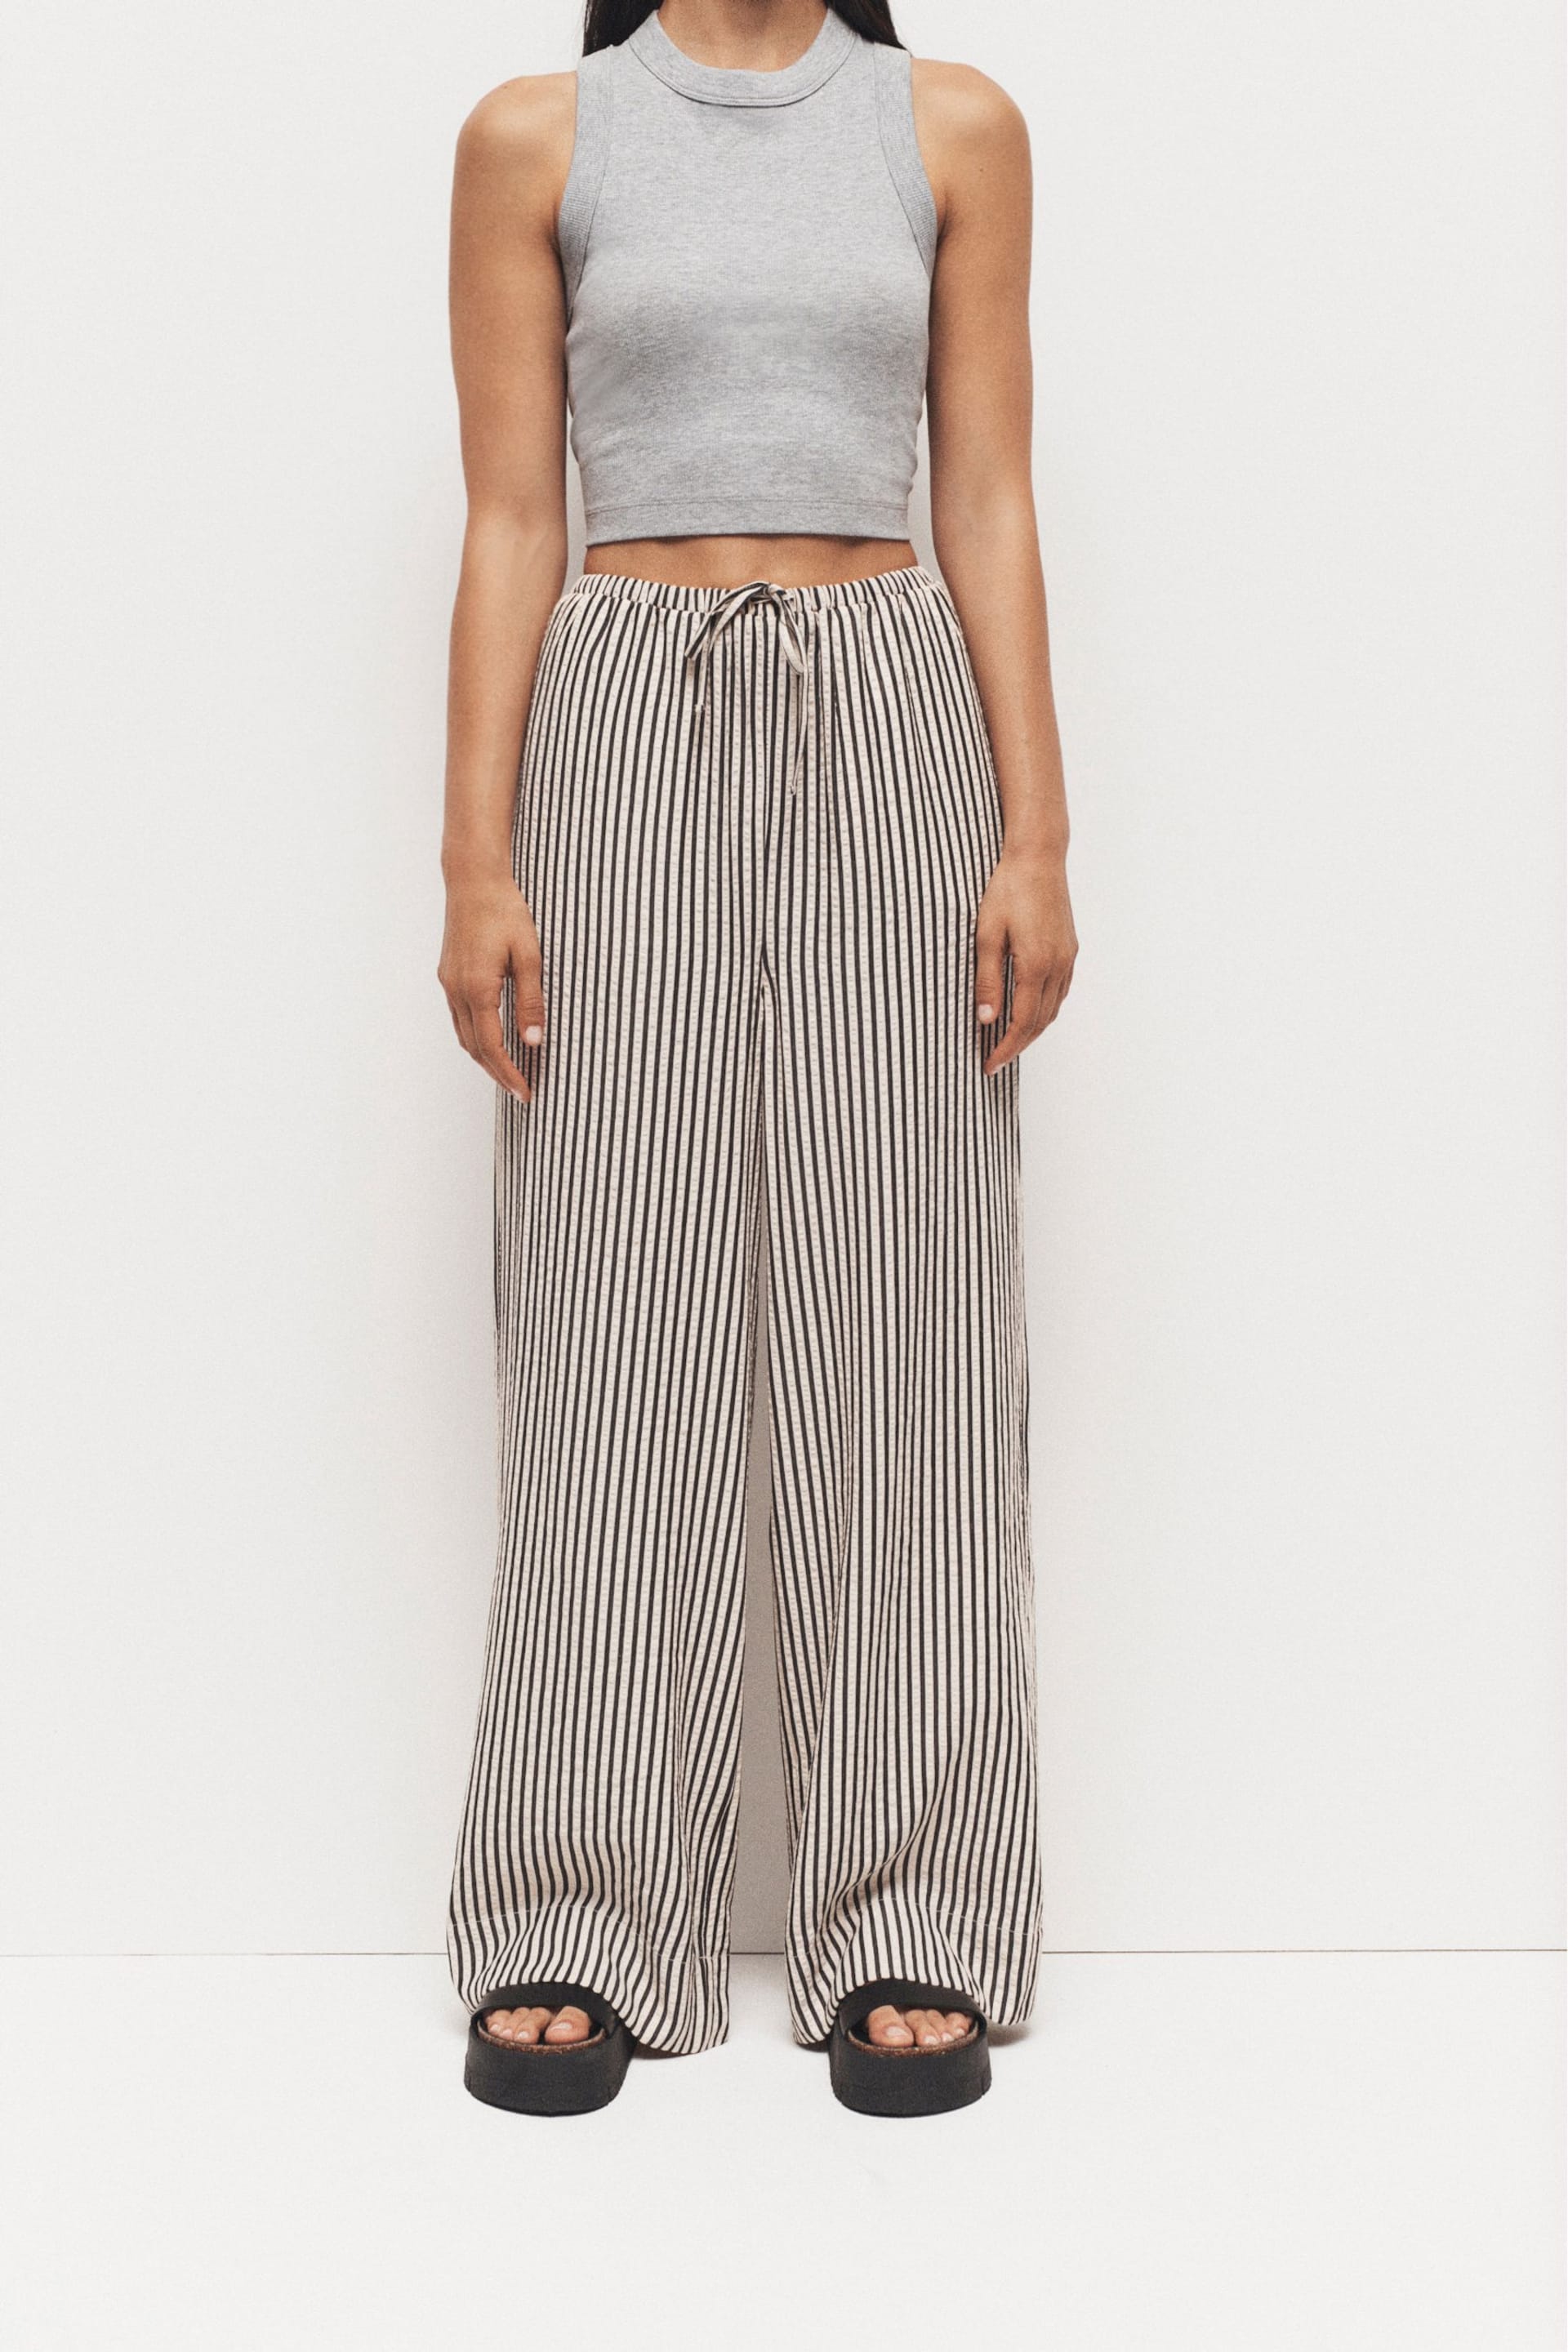 Black and White Textured Stripe Wide Leg Trousers - Image 2 of 6